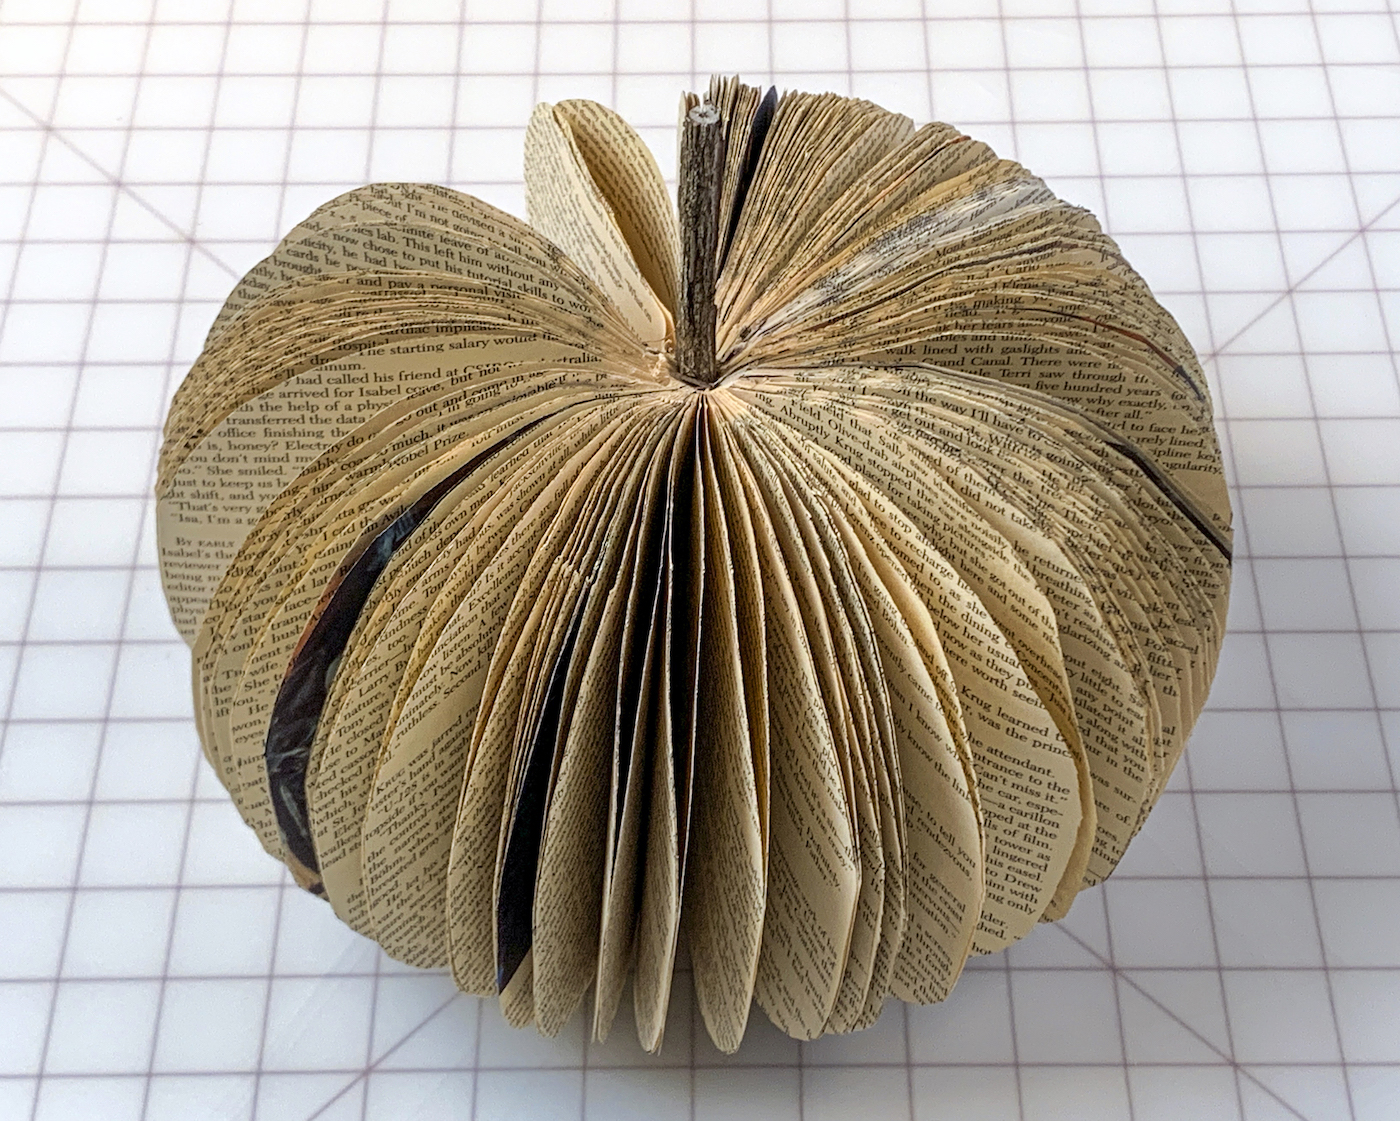 Completed book page pumpkin